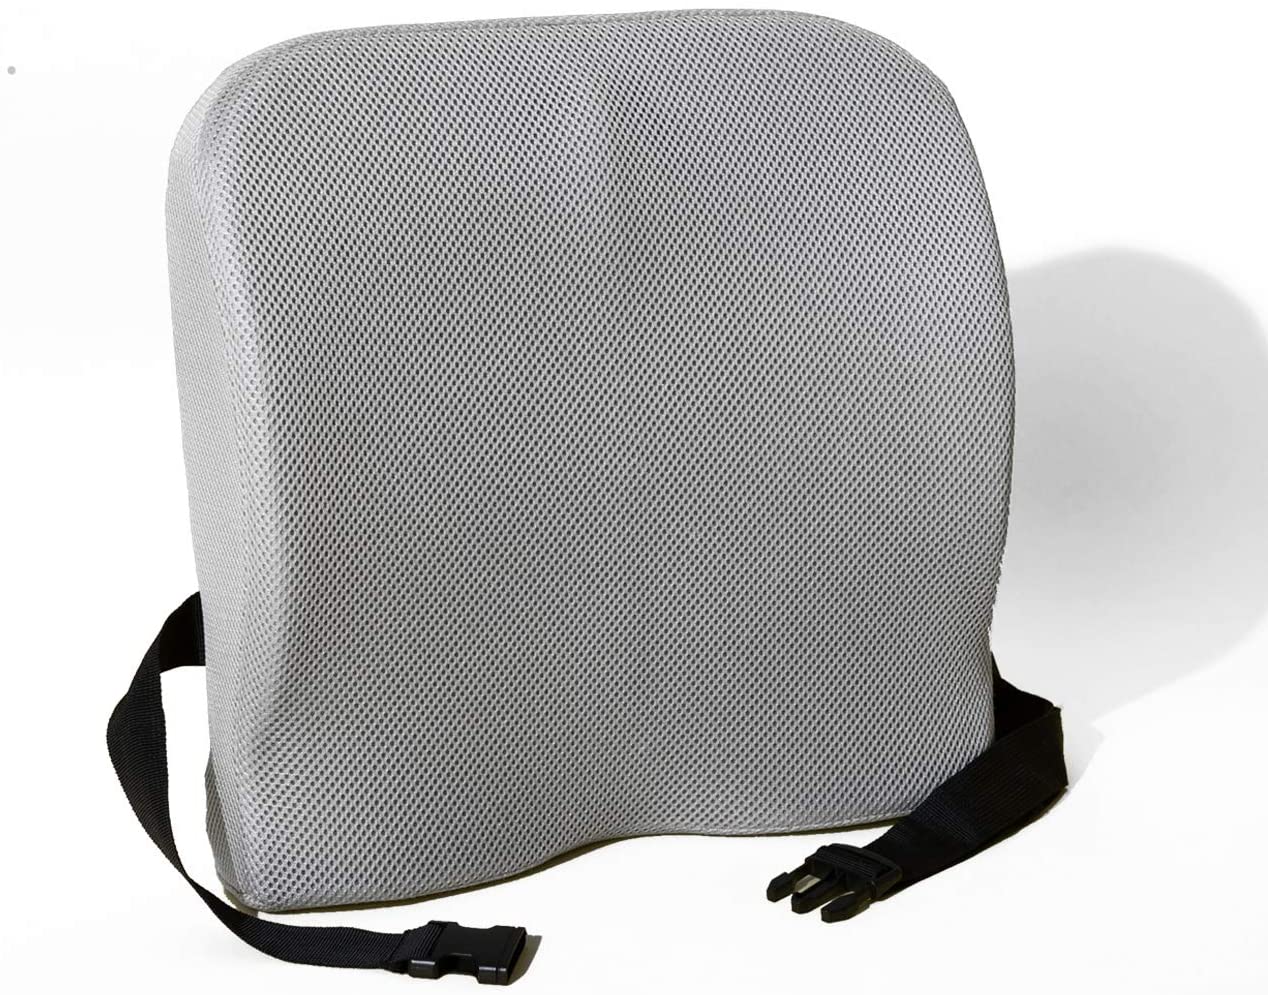 Coop Home Goods - Lumbar Support Back Cushion - Helps Relieve Lower Back Pain - Colling Back Pillow for Office Chair, Car Seat - Bamboo Charcoal Memory Foam - Adjustable Strap - Breathable Mesh - Gray